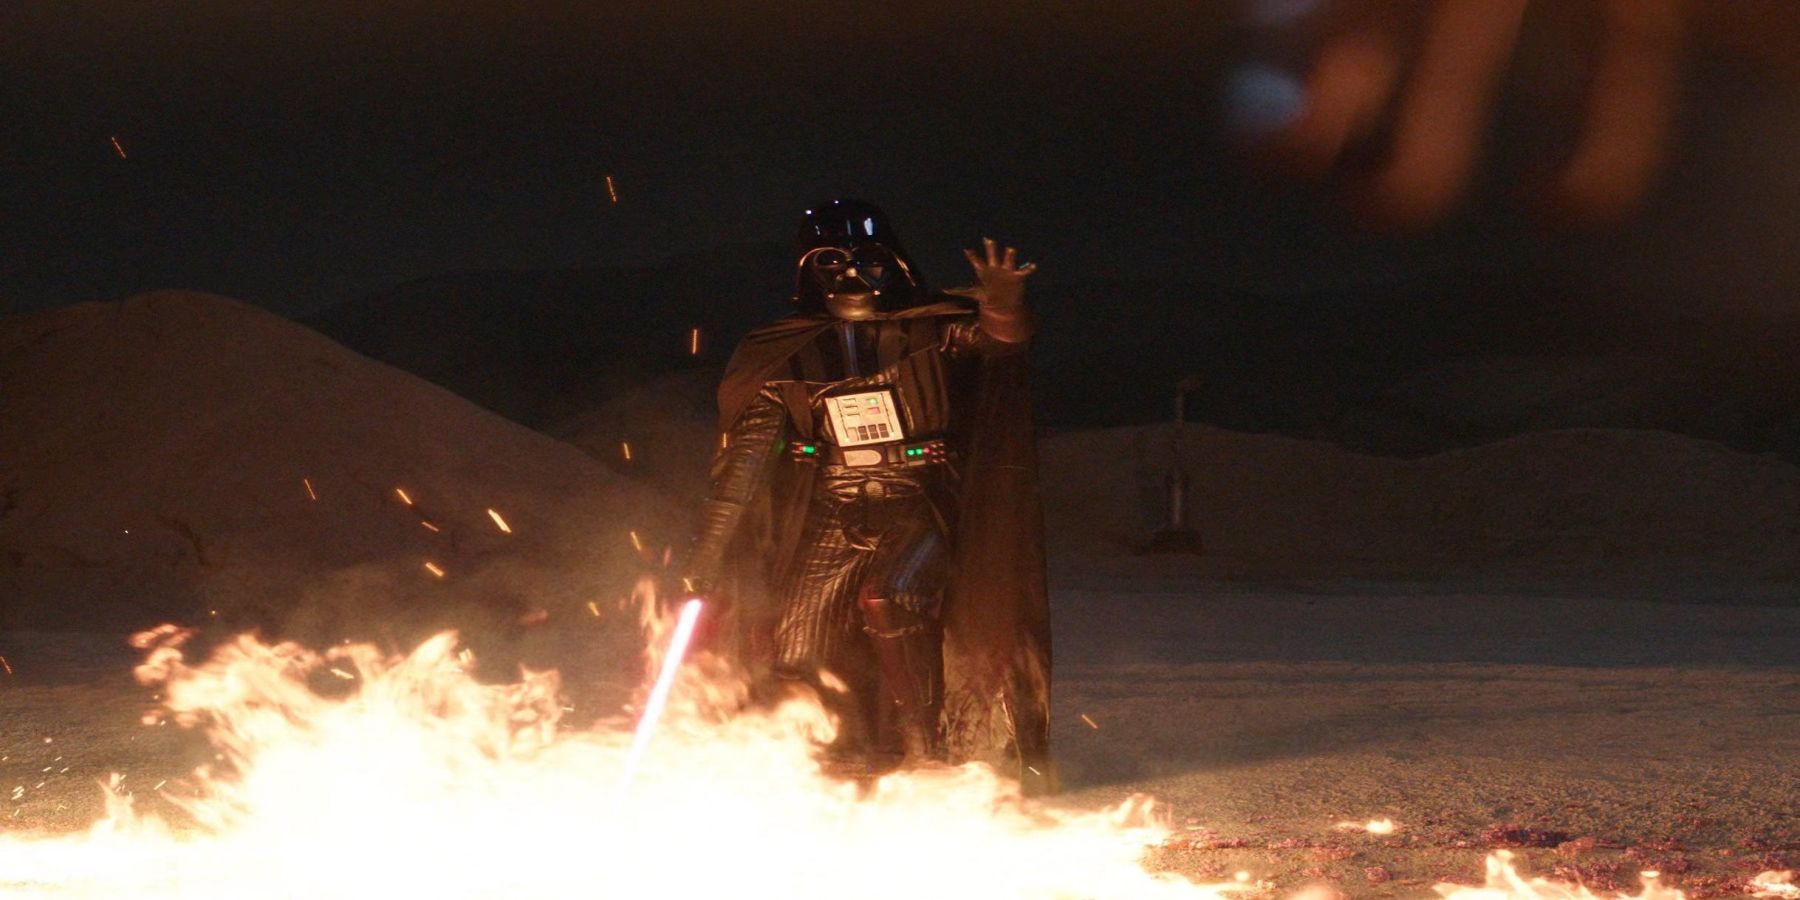 darth-vader about to put Kenobi in the fire only to let him get away inexplicably.